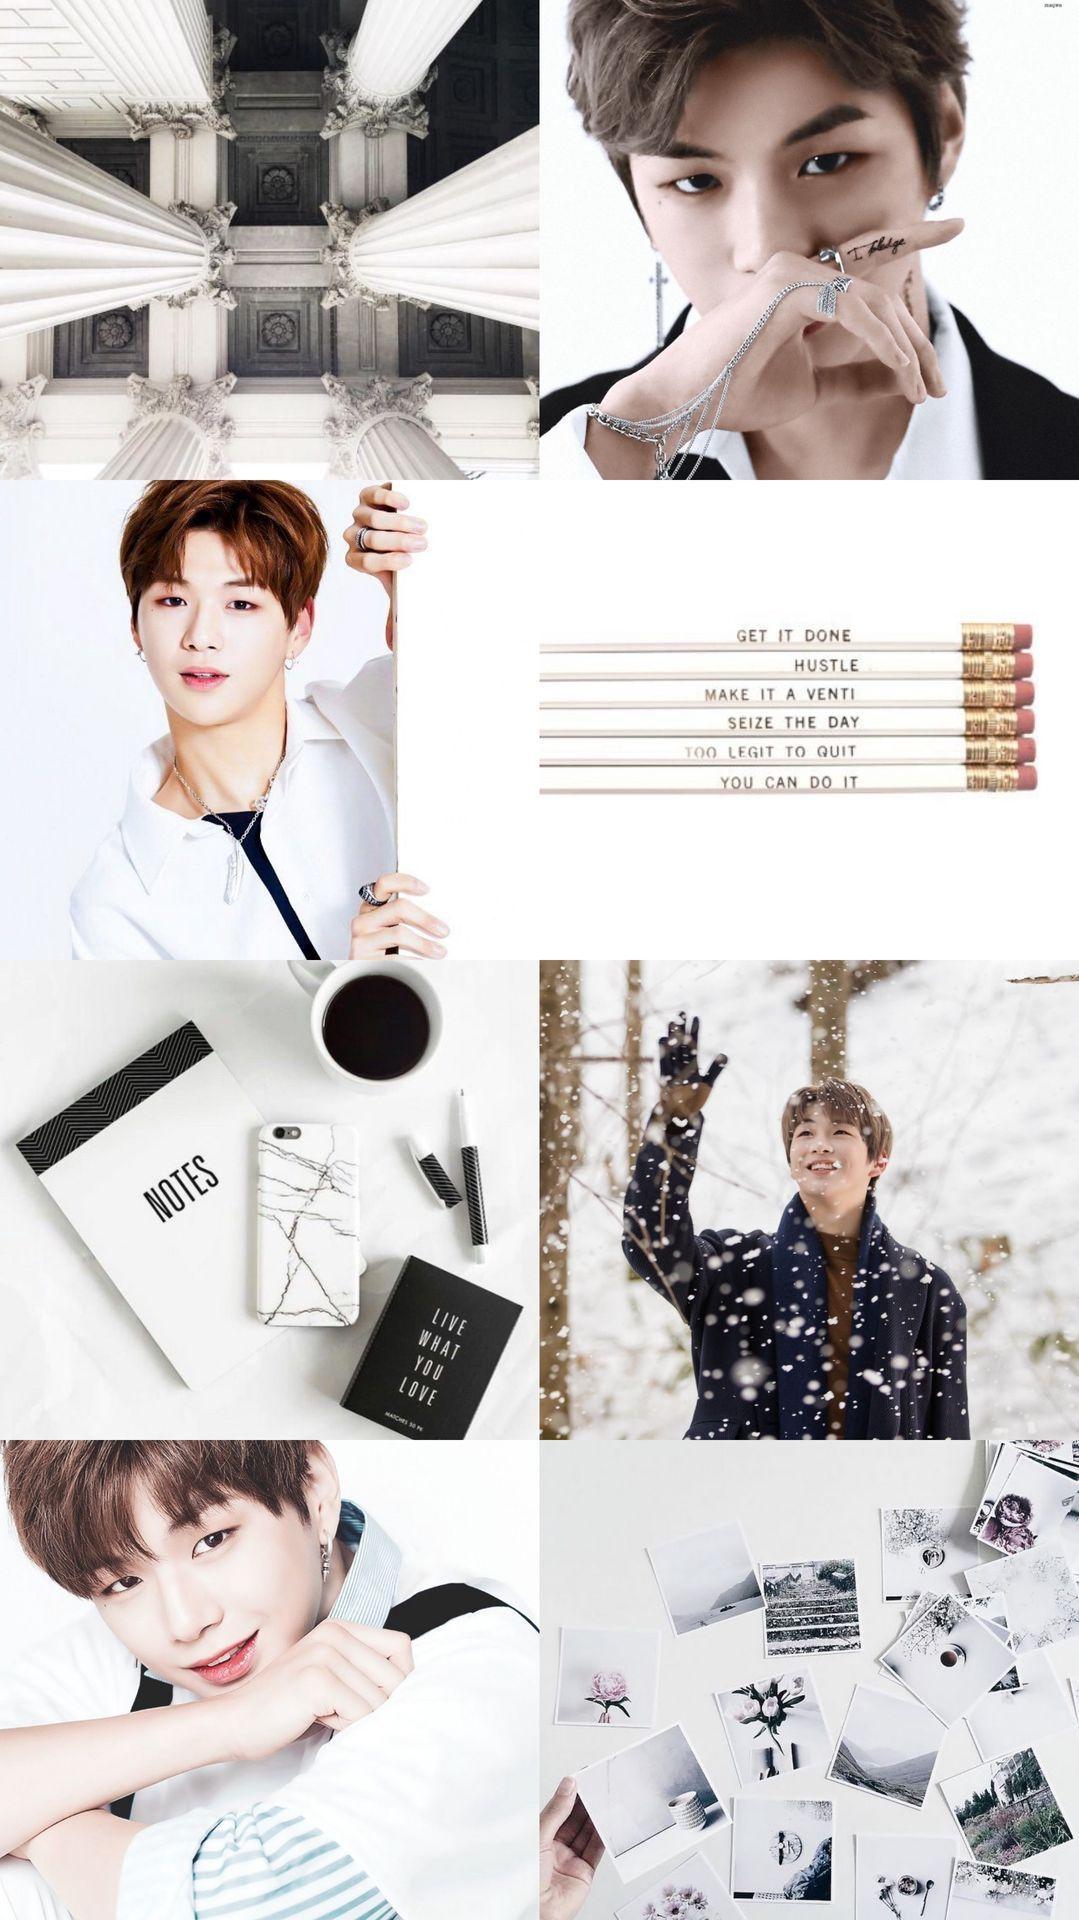 KPOP Aesthetic Collage (REQUESTS CLOSED) One Kang Daniel